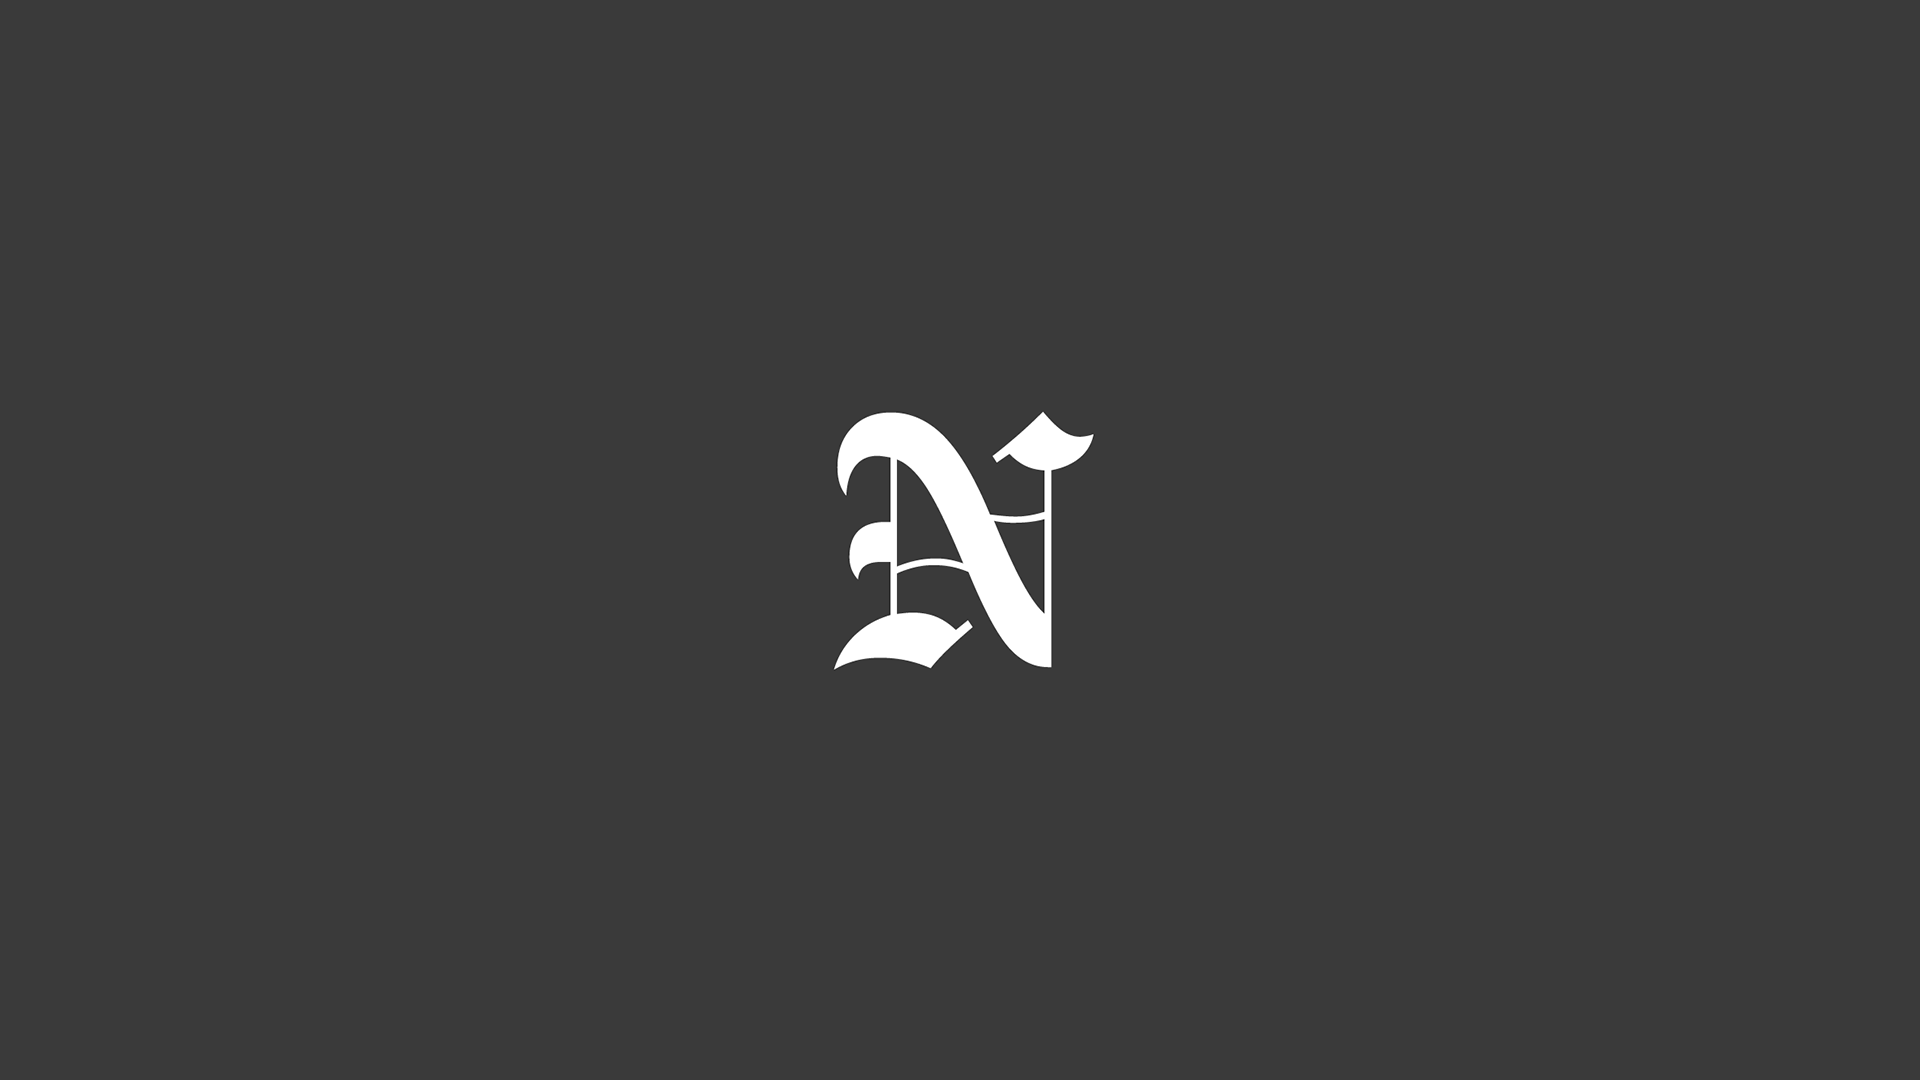 N, HD Logo, 4k Wallpaper, Image, Background, Photo and Picture